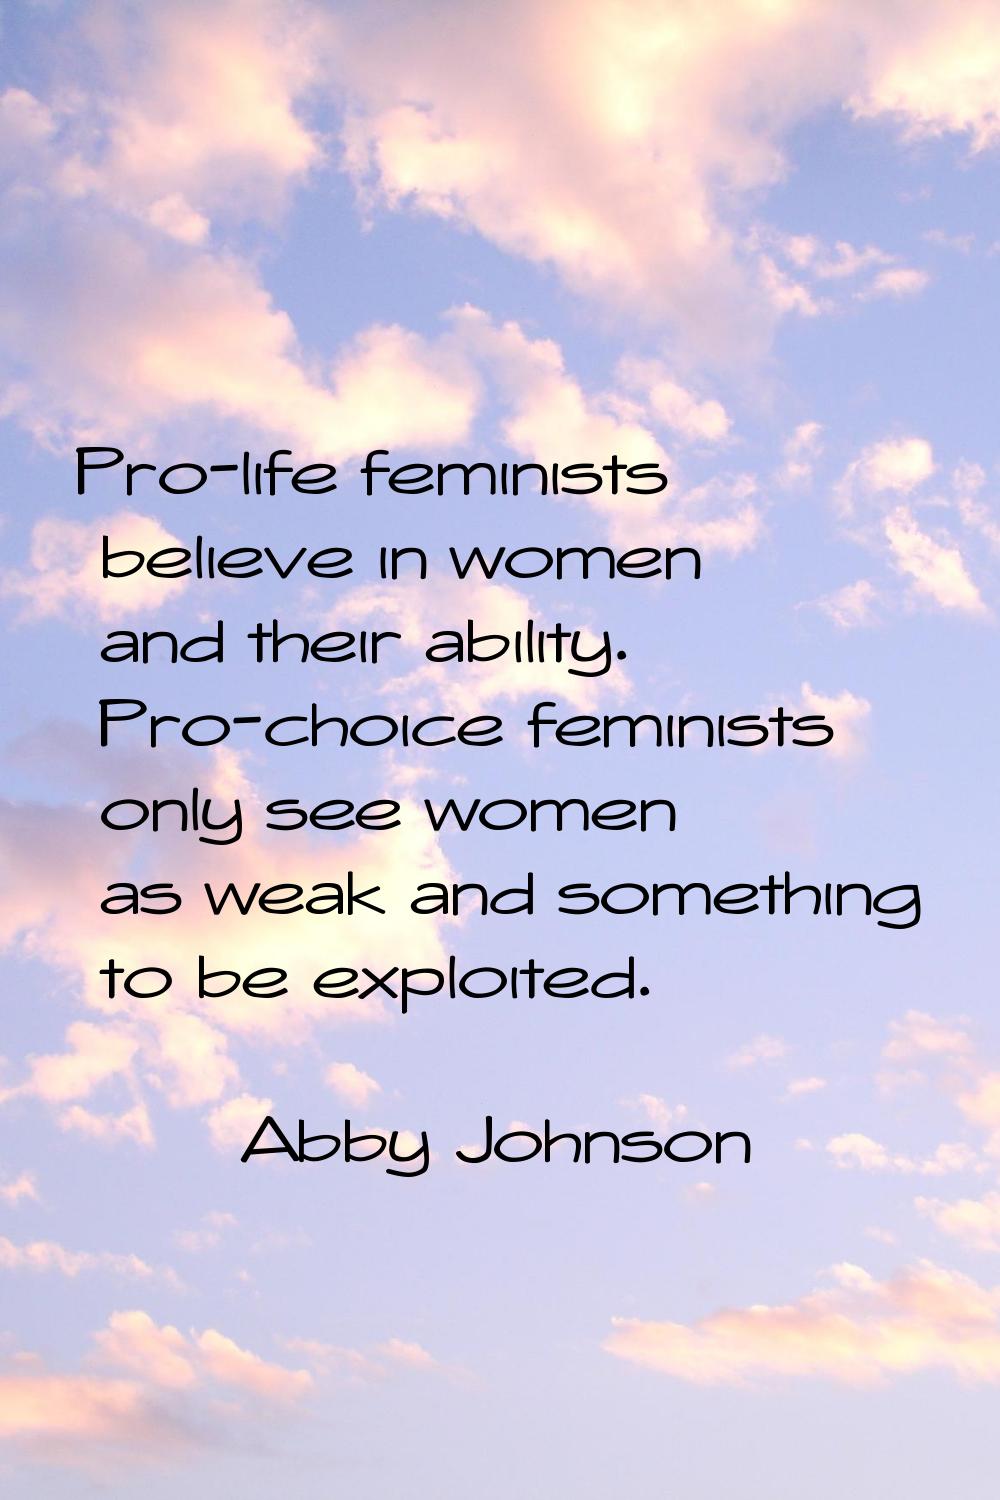 Pro-life feminists believe in women and their ability. Pro-choice feminists only see women as weak 